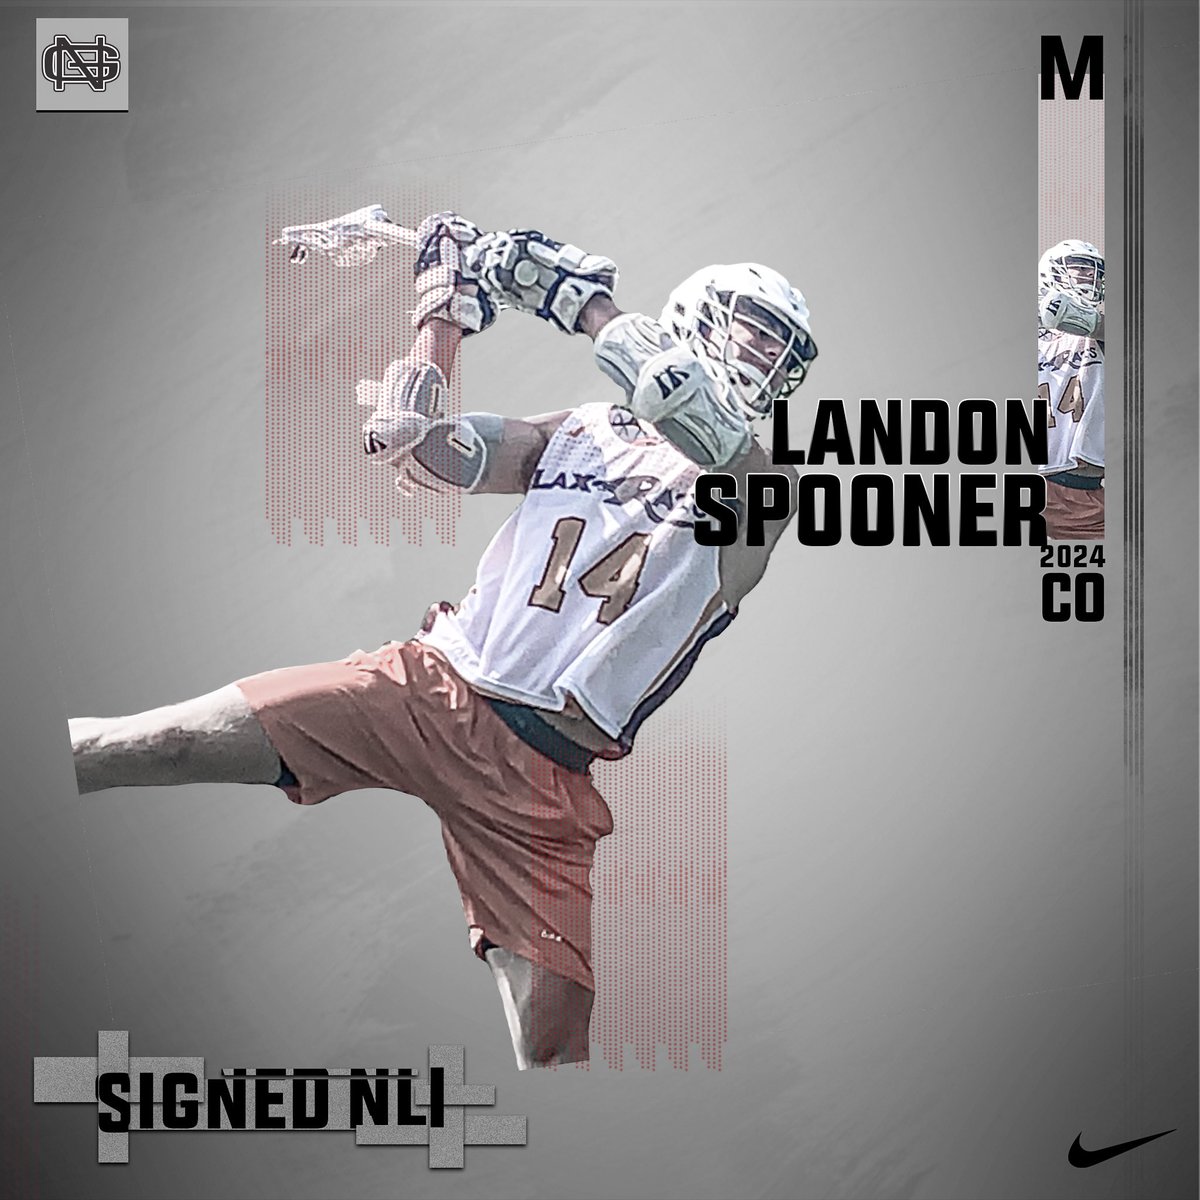 We are so excited to announce some recent commitments that will help us on our mission:

🔴 Landon Spooner
⚫️ Loganville HS (GA)
🔨 Midfield
🥍 @LaxRatsLLC
🏈 Also a HS All-American linebacker who will play for @NGUFootball1 

#LetsGo #GrabAShovel